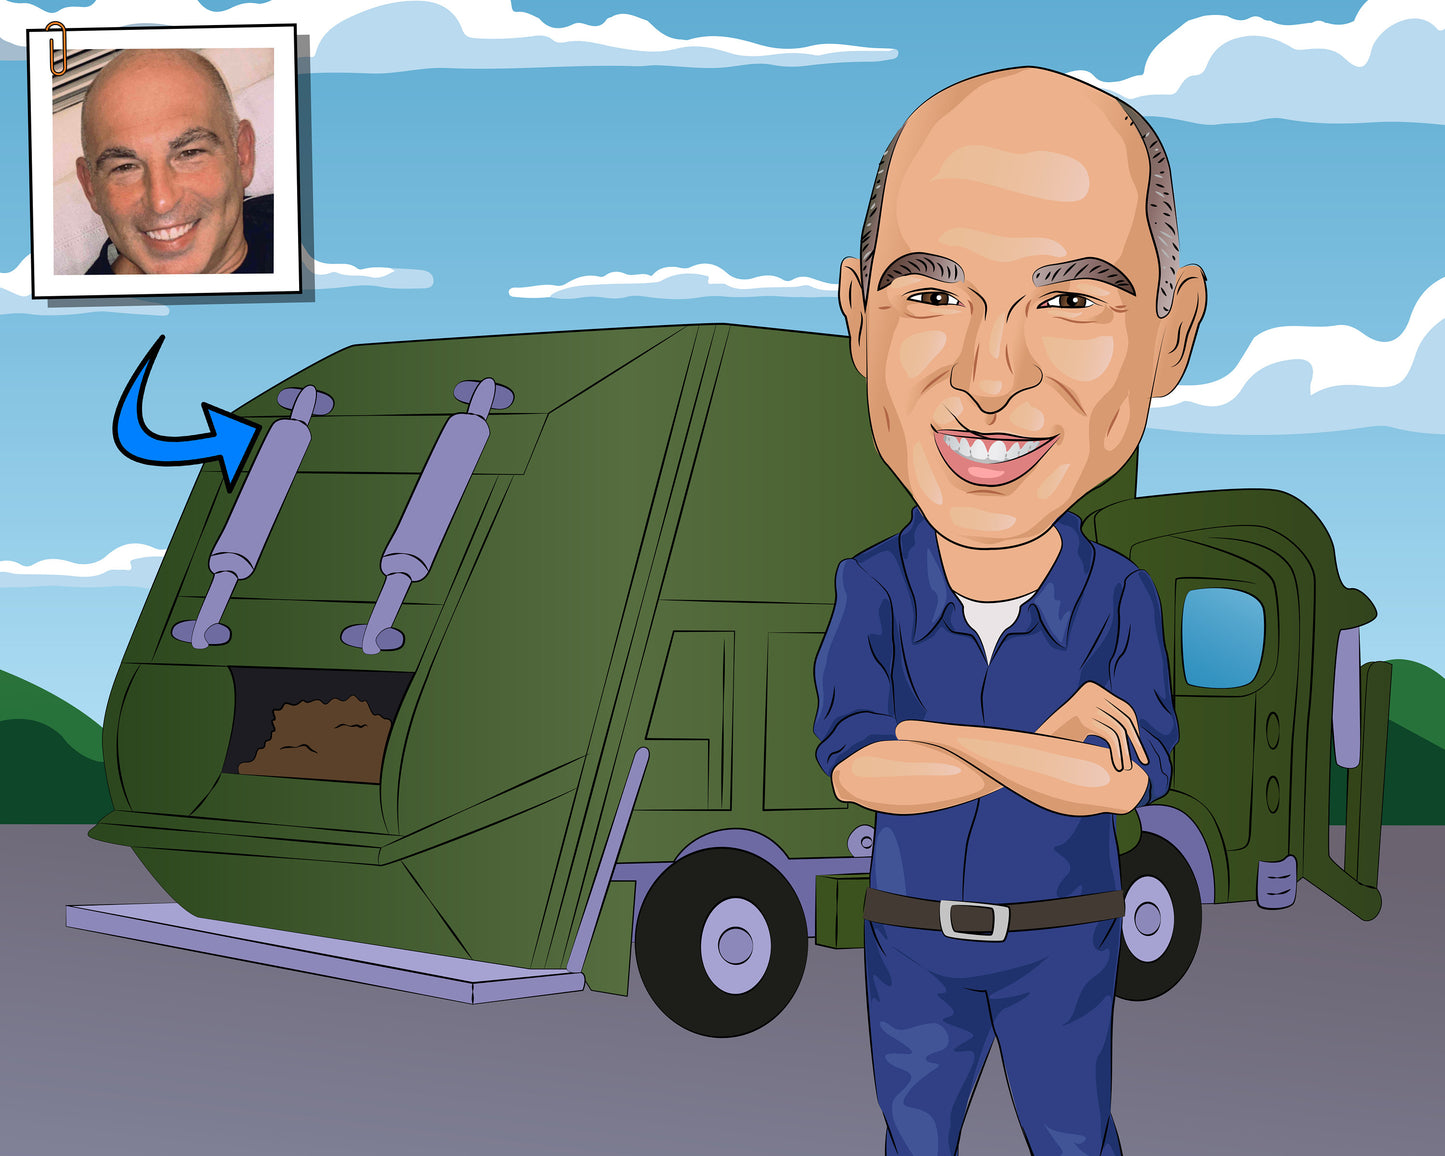 Garbage Truck Driver Gift - Custom Caricature Portrait From Your Photo